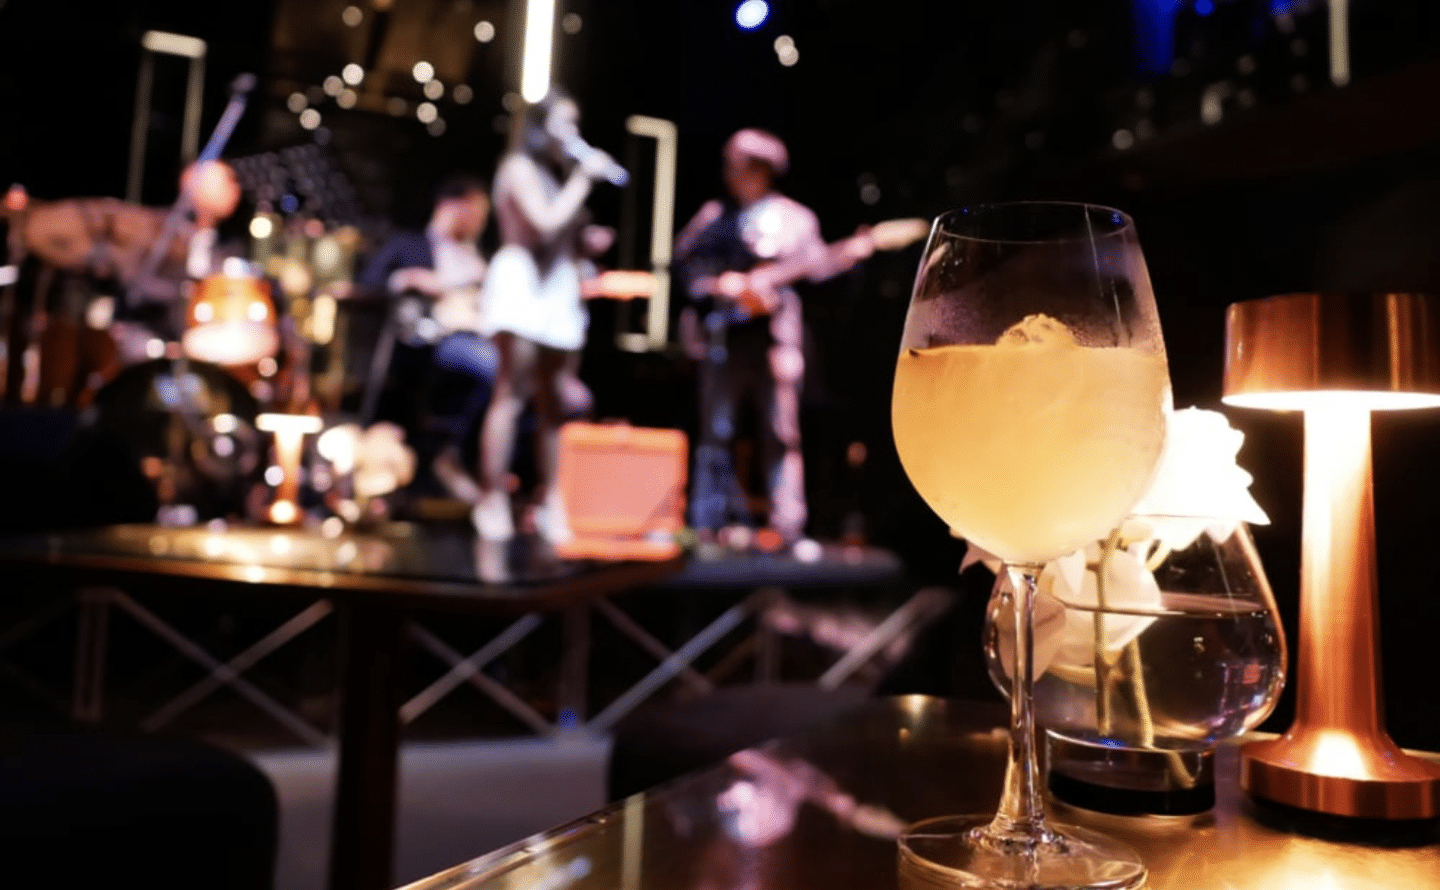 Best Restaurants In L.A. With Live Music - Secret Los Angeles